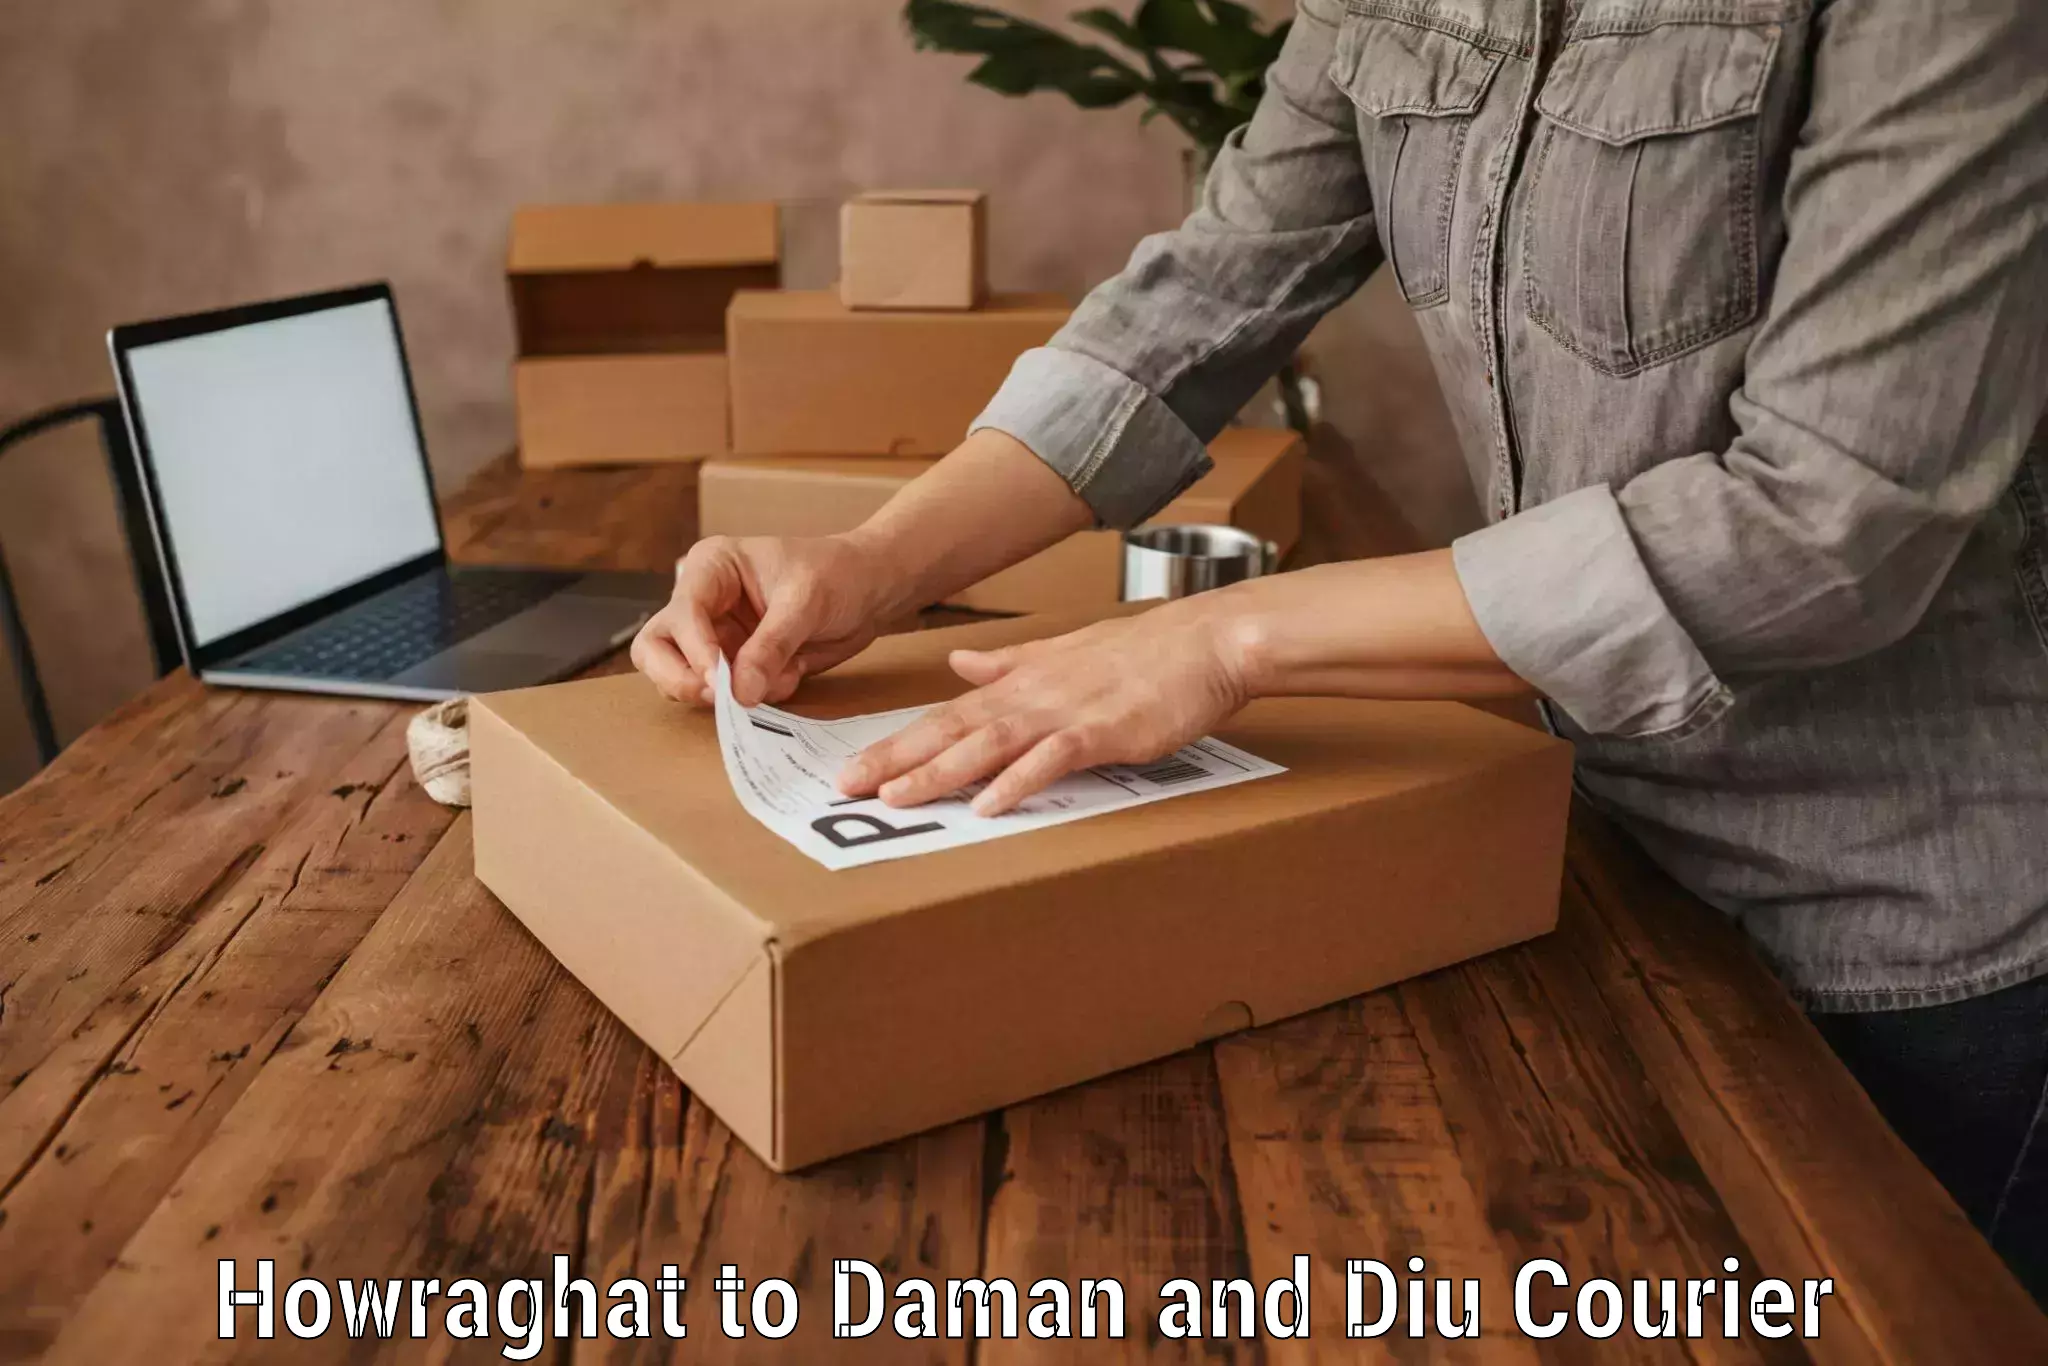 Baggage delivery technology Howraghat to Daman and Diu